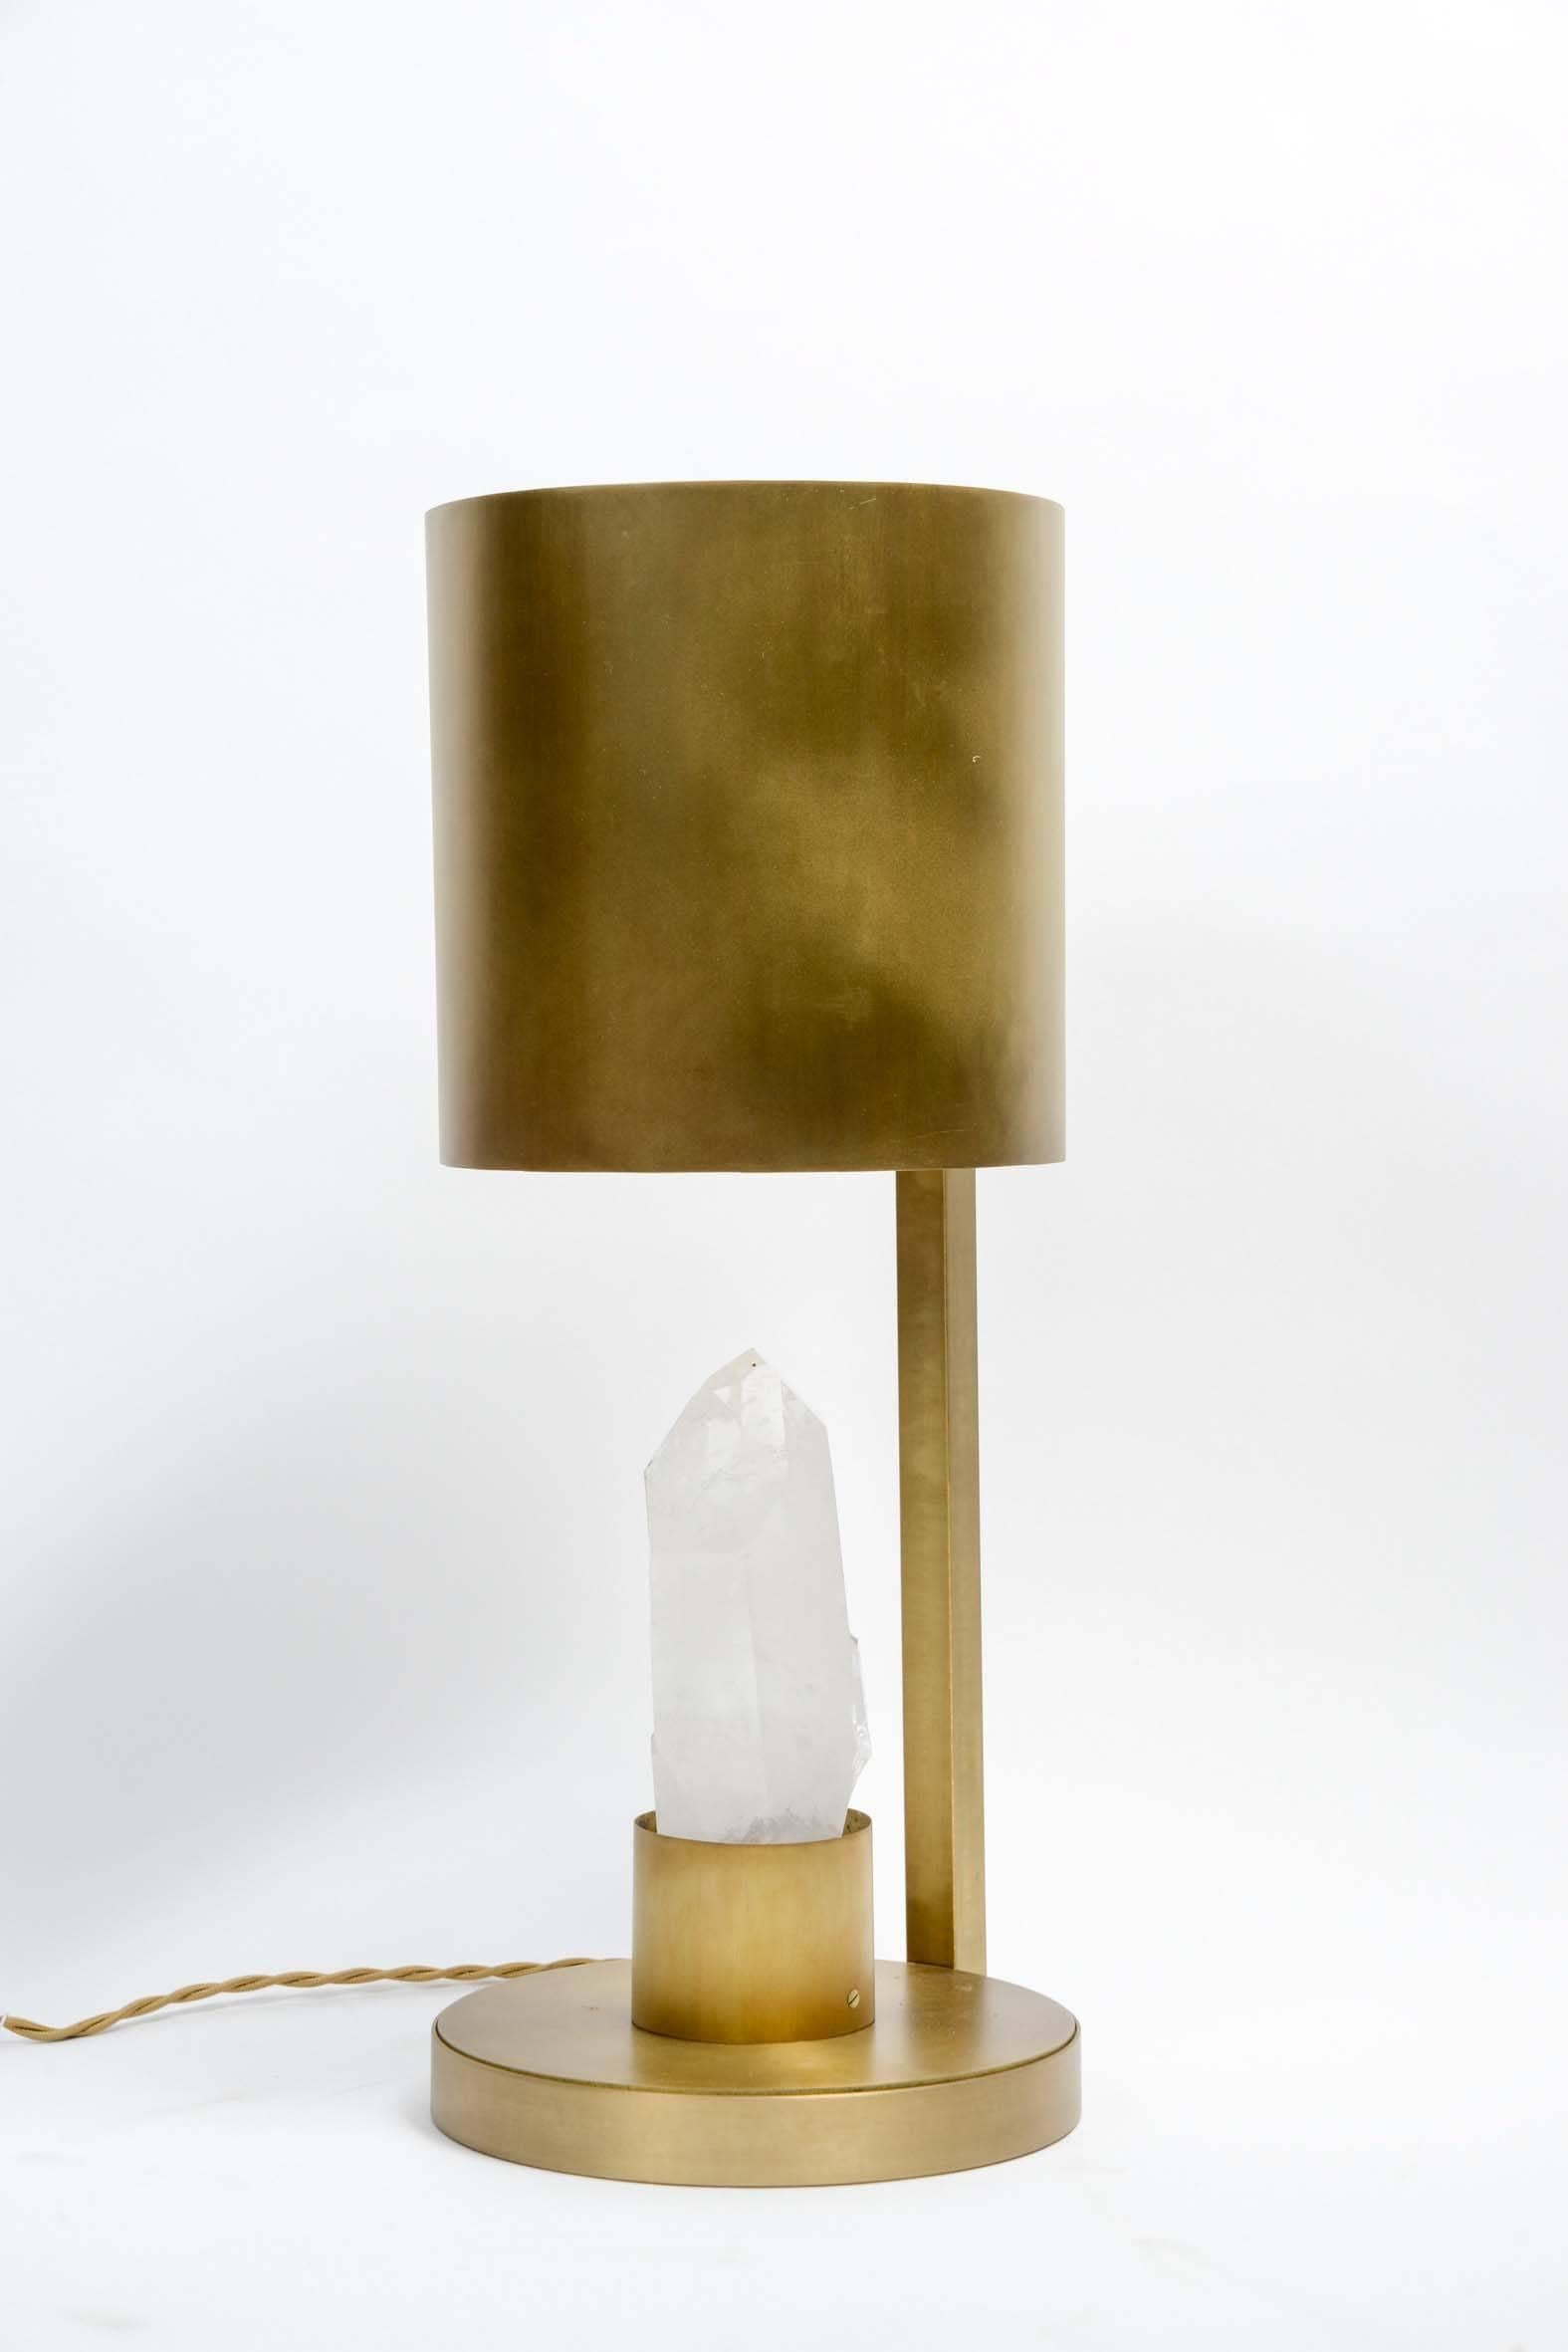 Cylindrical desk lamp made of brass and a rock crystal center piece.

One source of light, a bulb enlightening the rock crystal from above.